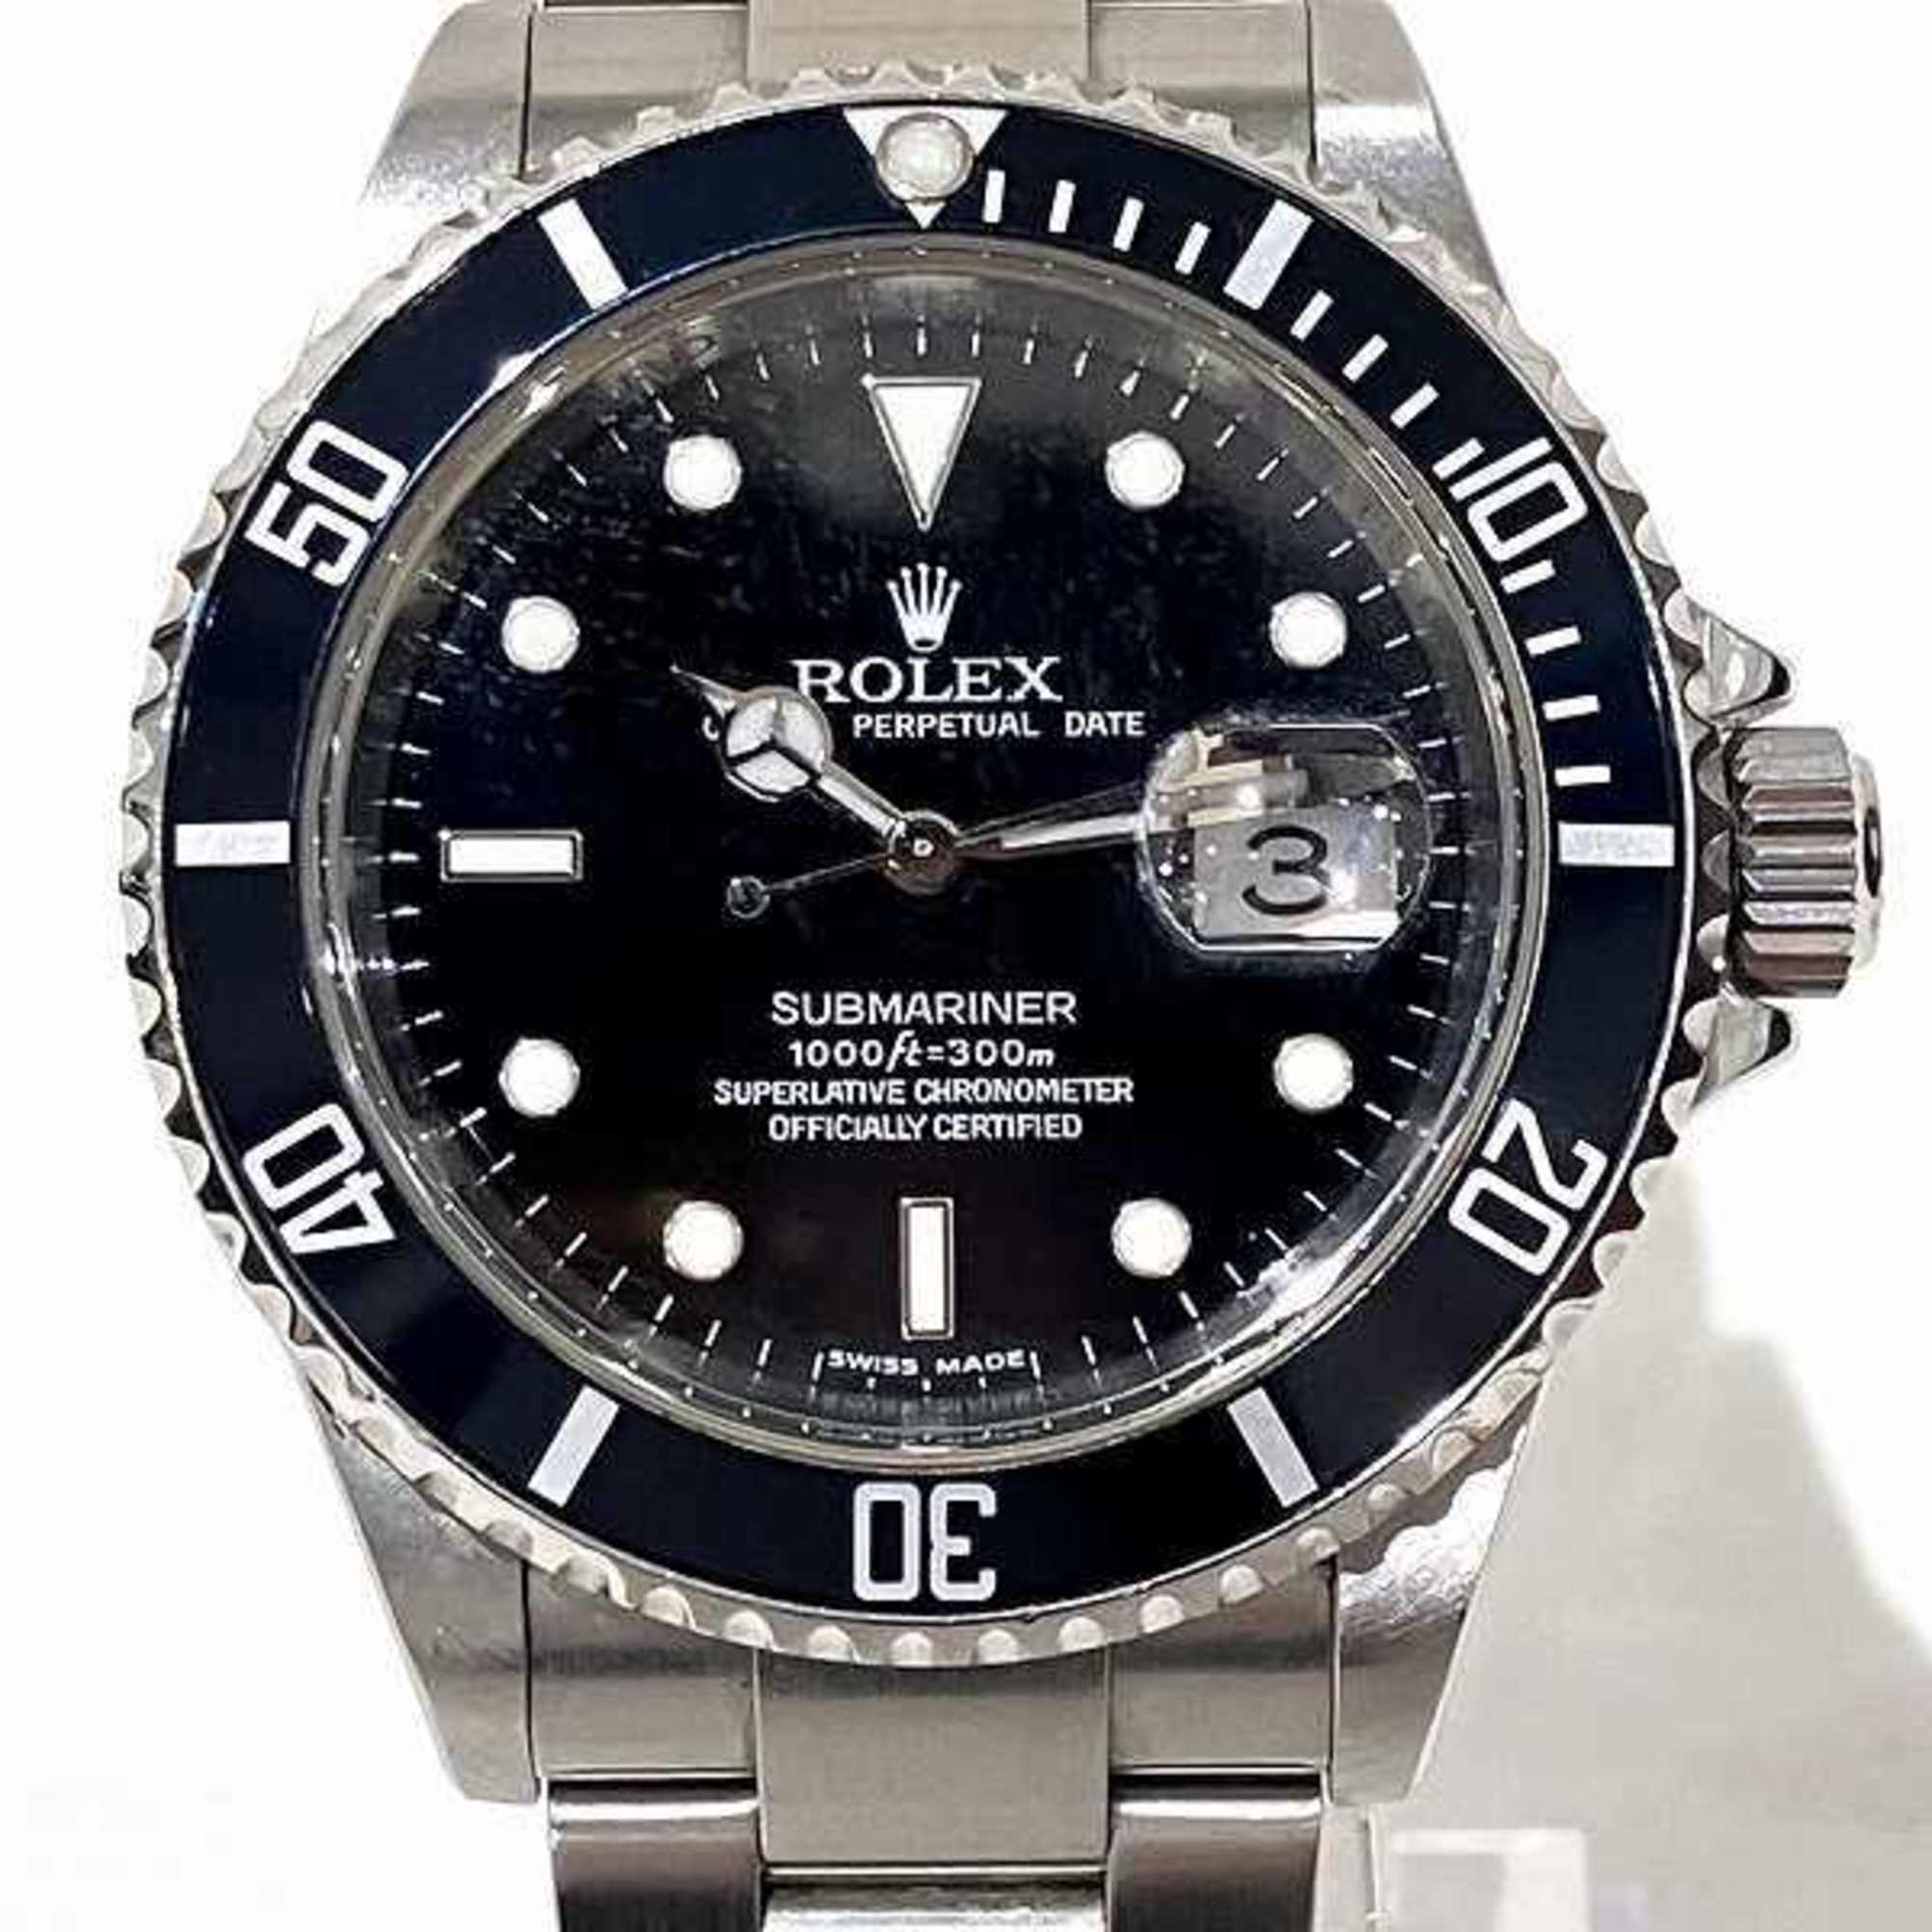 Rolex Submariner Date 16610 M number automatic watch men's